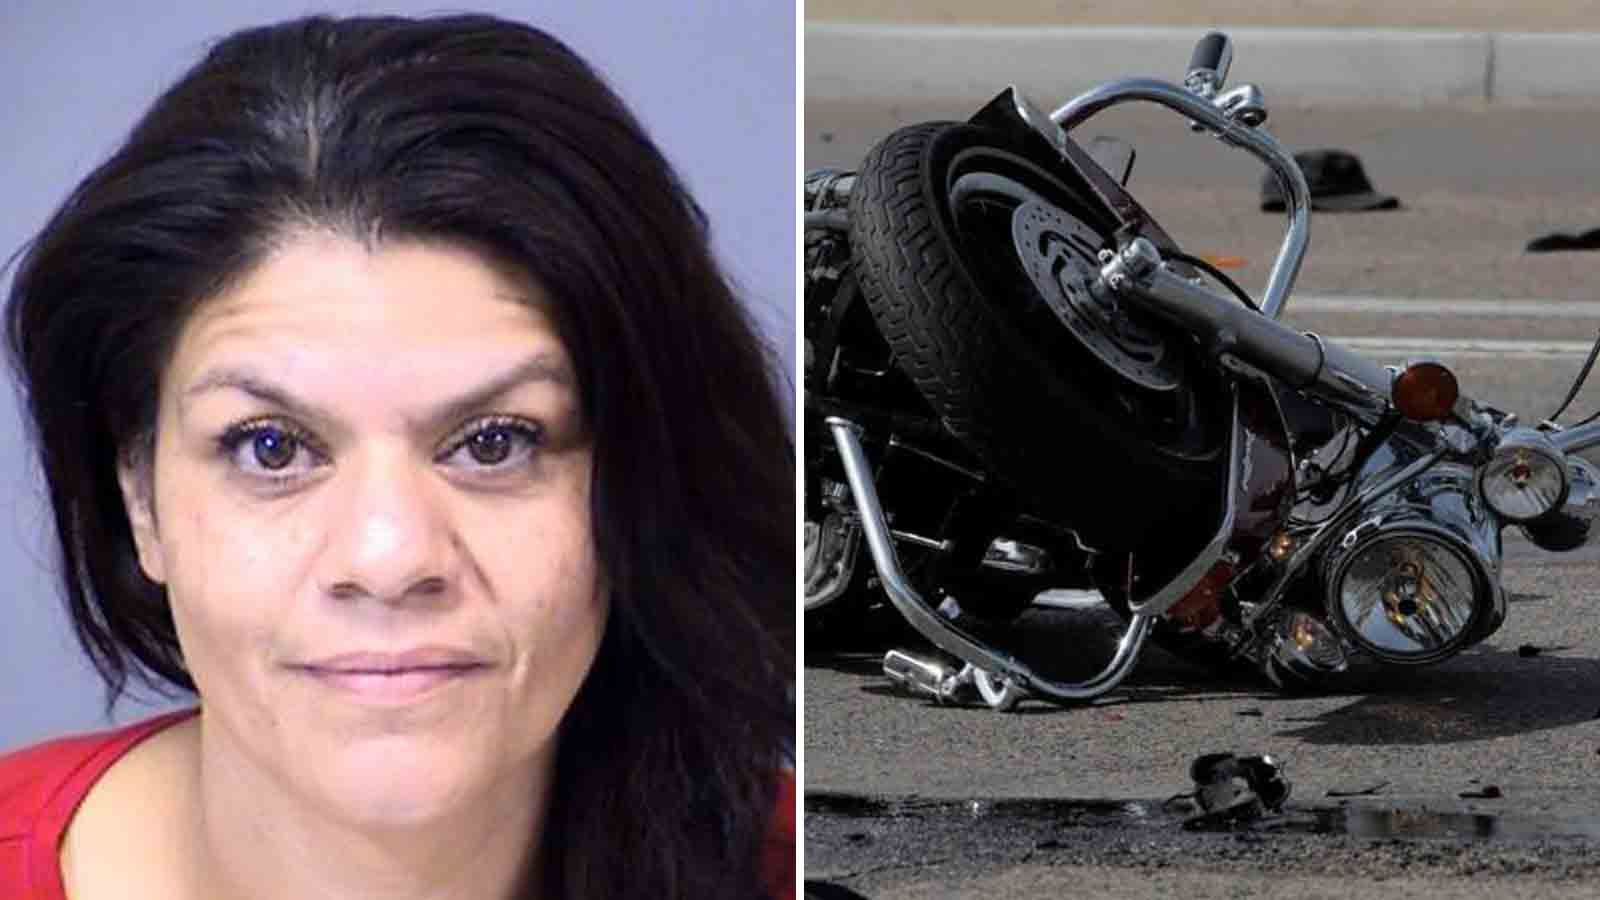 Woman who was allegedly impaired arrested after fatal crash with motorcyclist in Phoenix